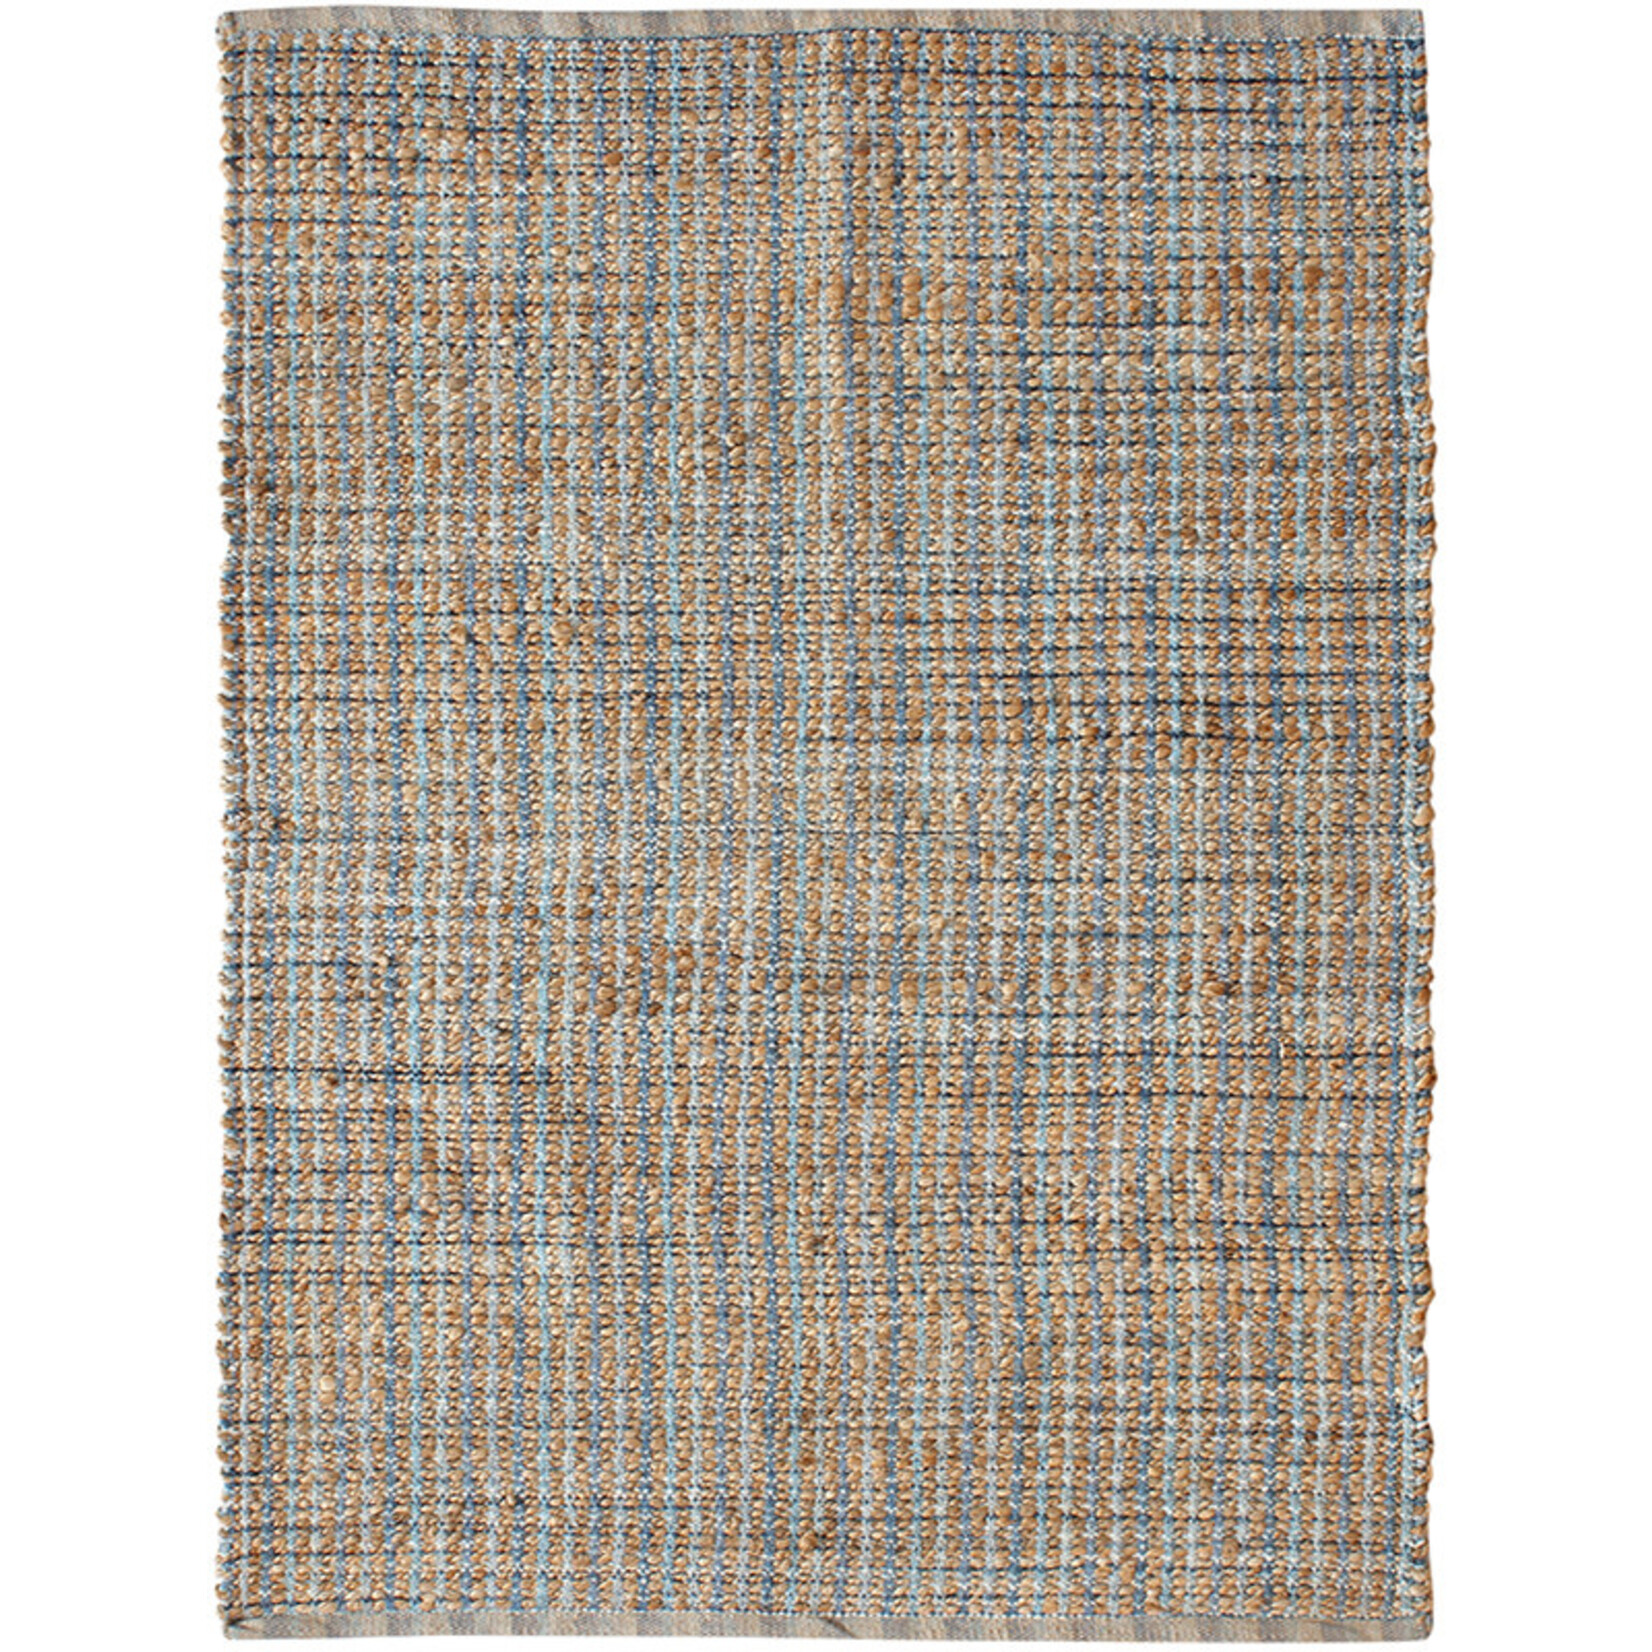 Outside The Box 5' x 7' 9" Bleached Naturals Jute / Rayon Chenille Blend Area Rug In Navy - 03305